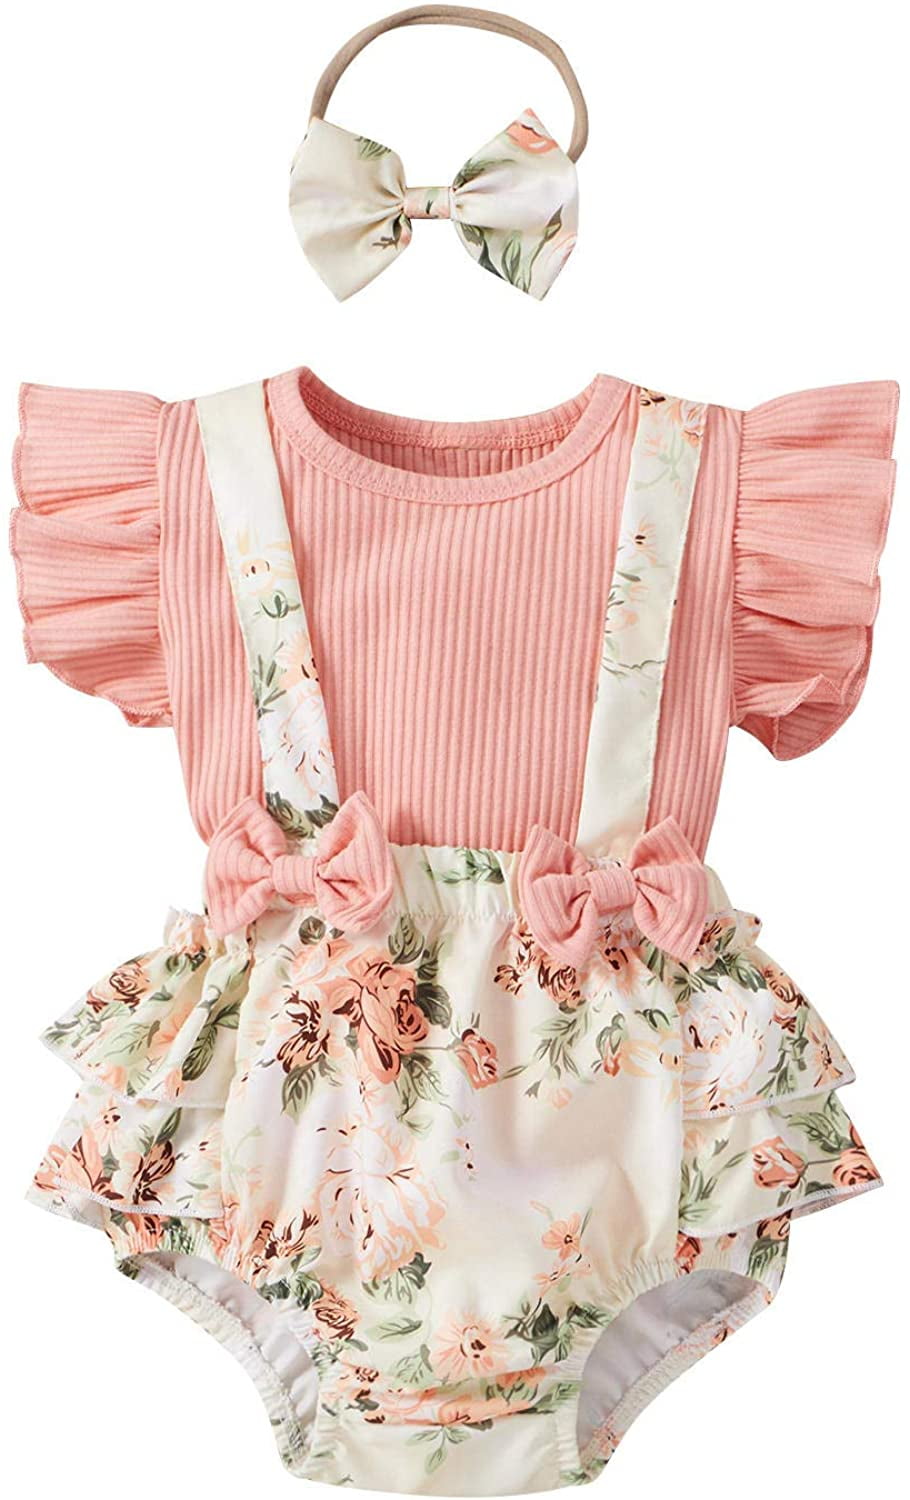 Baby Girl Summer Outfit Floral Ruffle Suspender Romper with Headband Newborn Girls Clothes Sets 